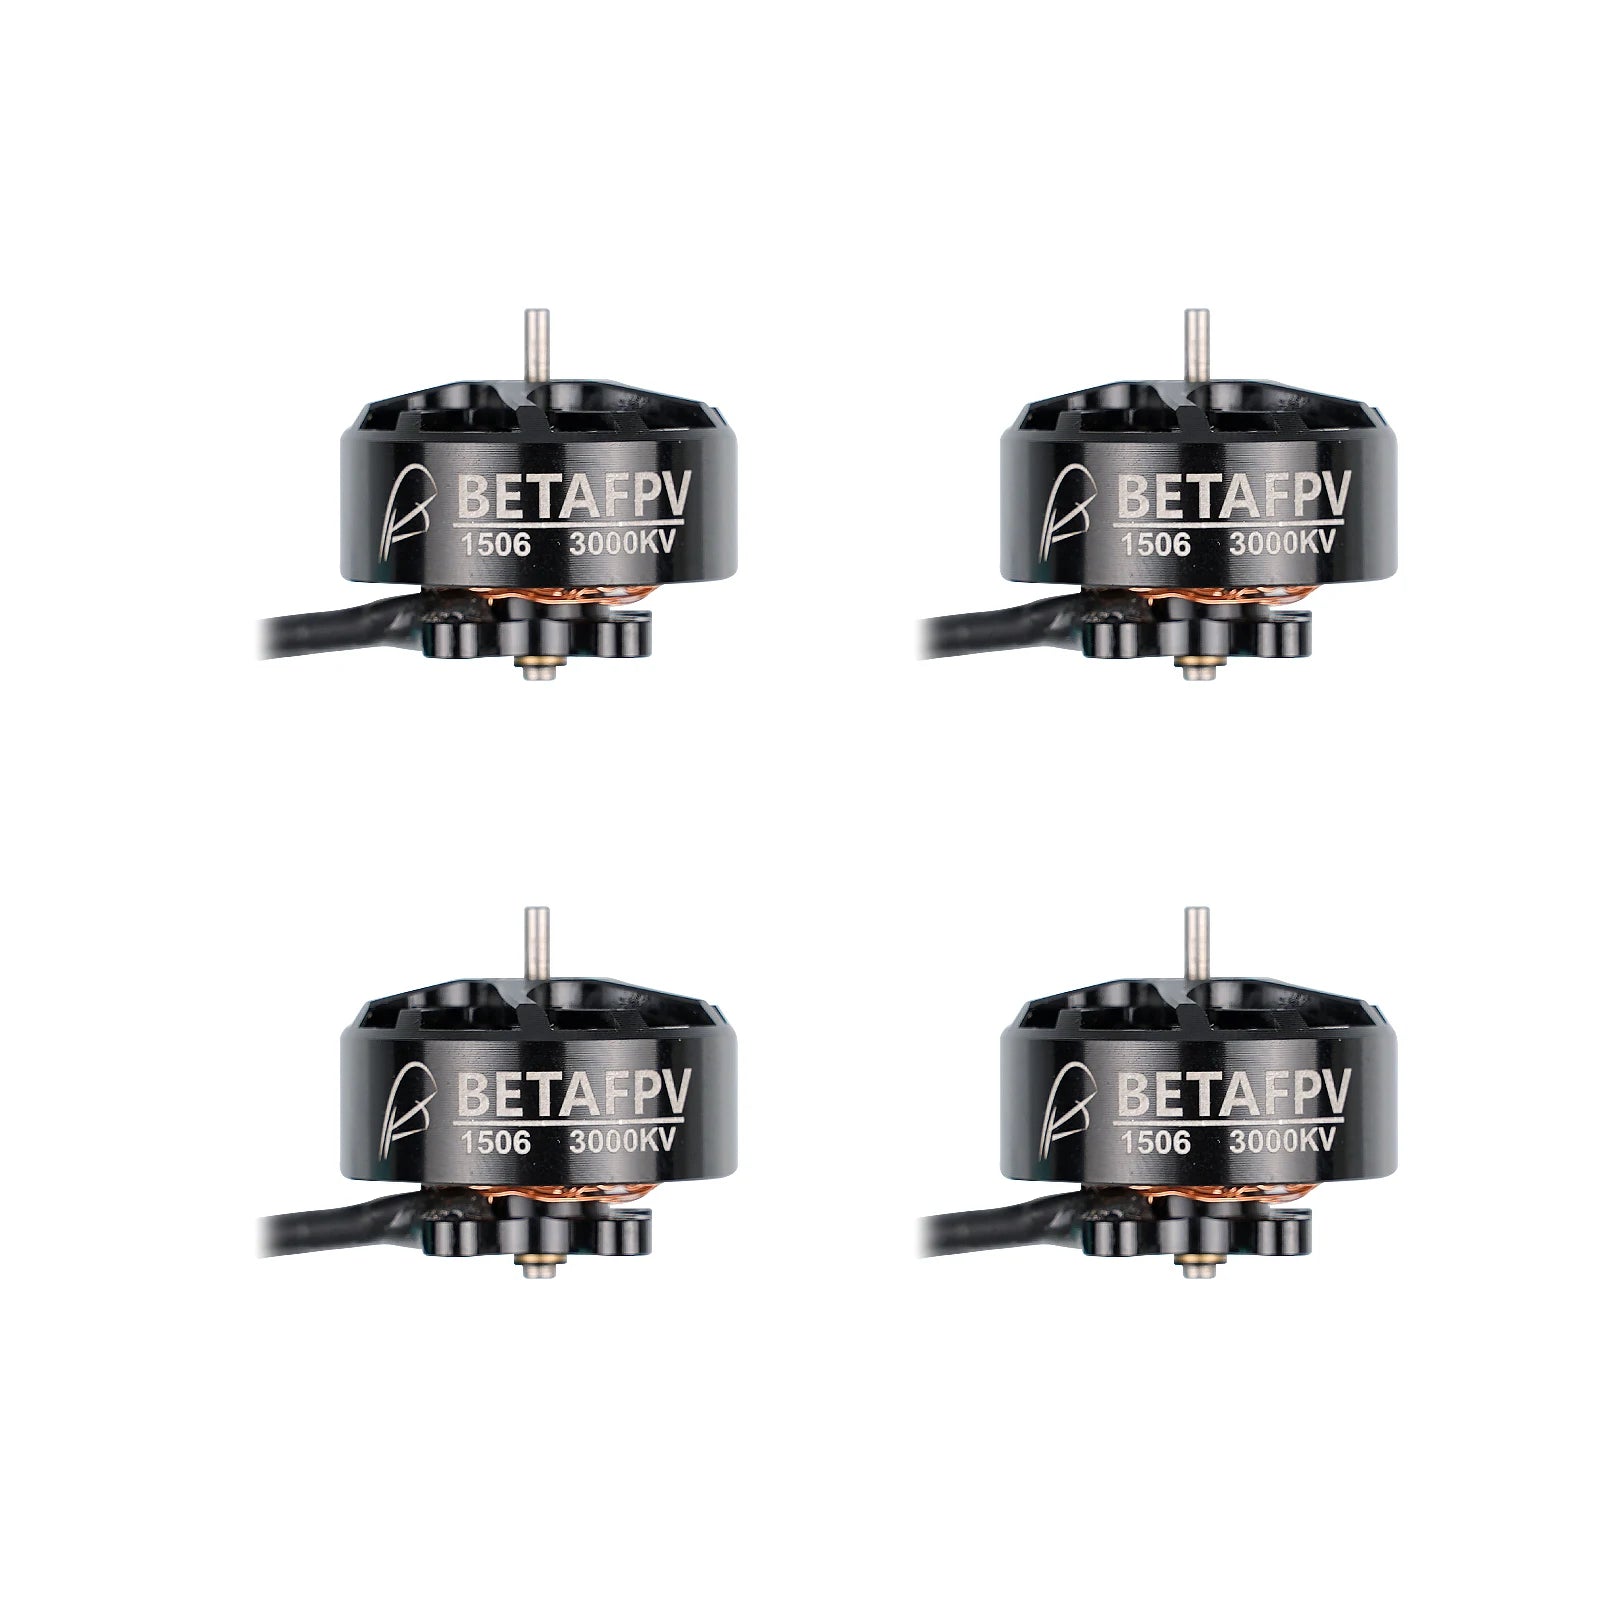 BETAFPV 1506 3000KV Brushless Motors, 20A Toothpick F4 AIO FC will bring you a powerful flight experience 